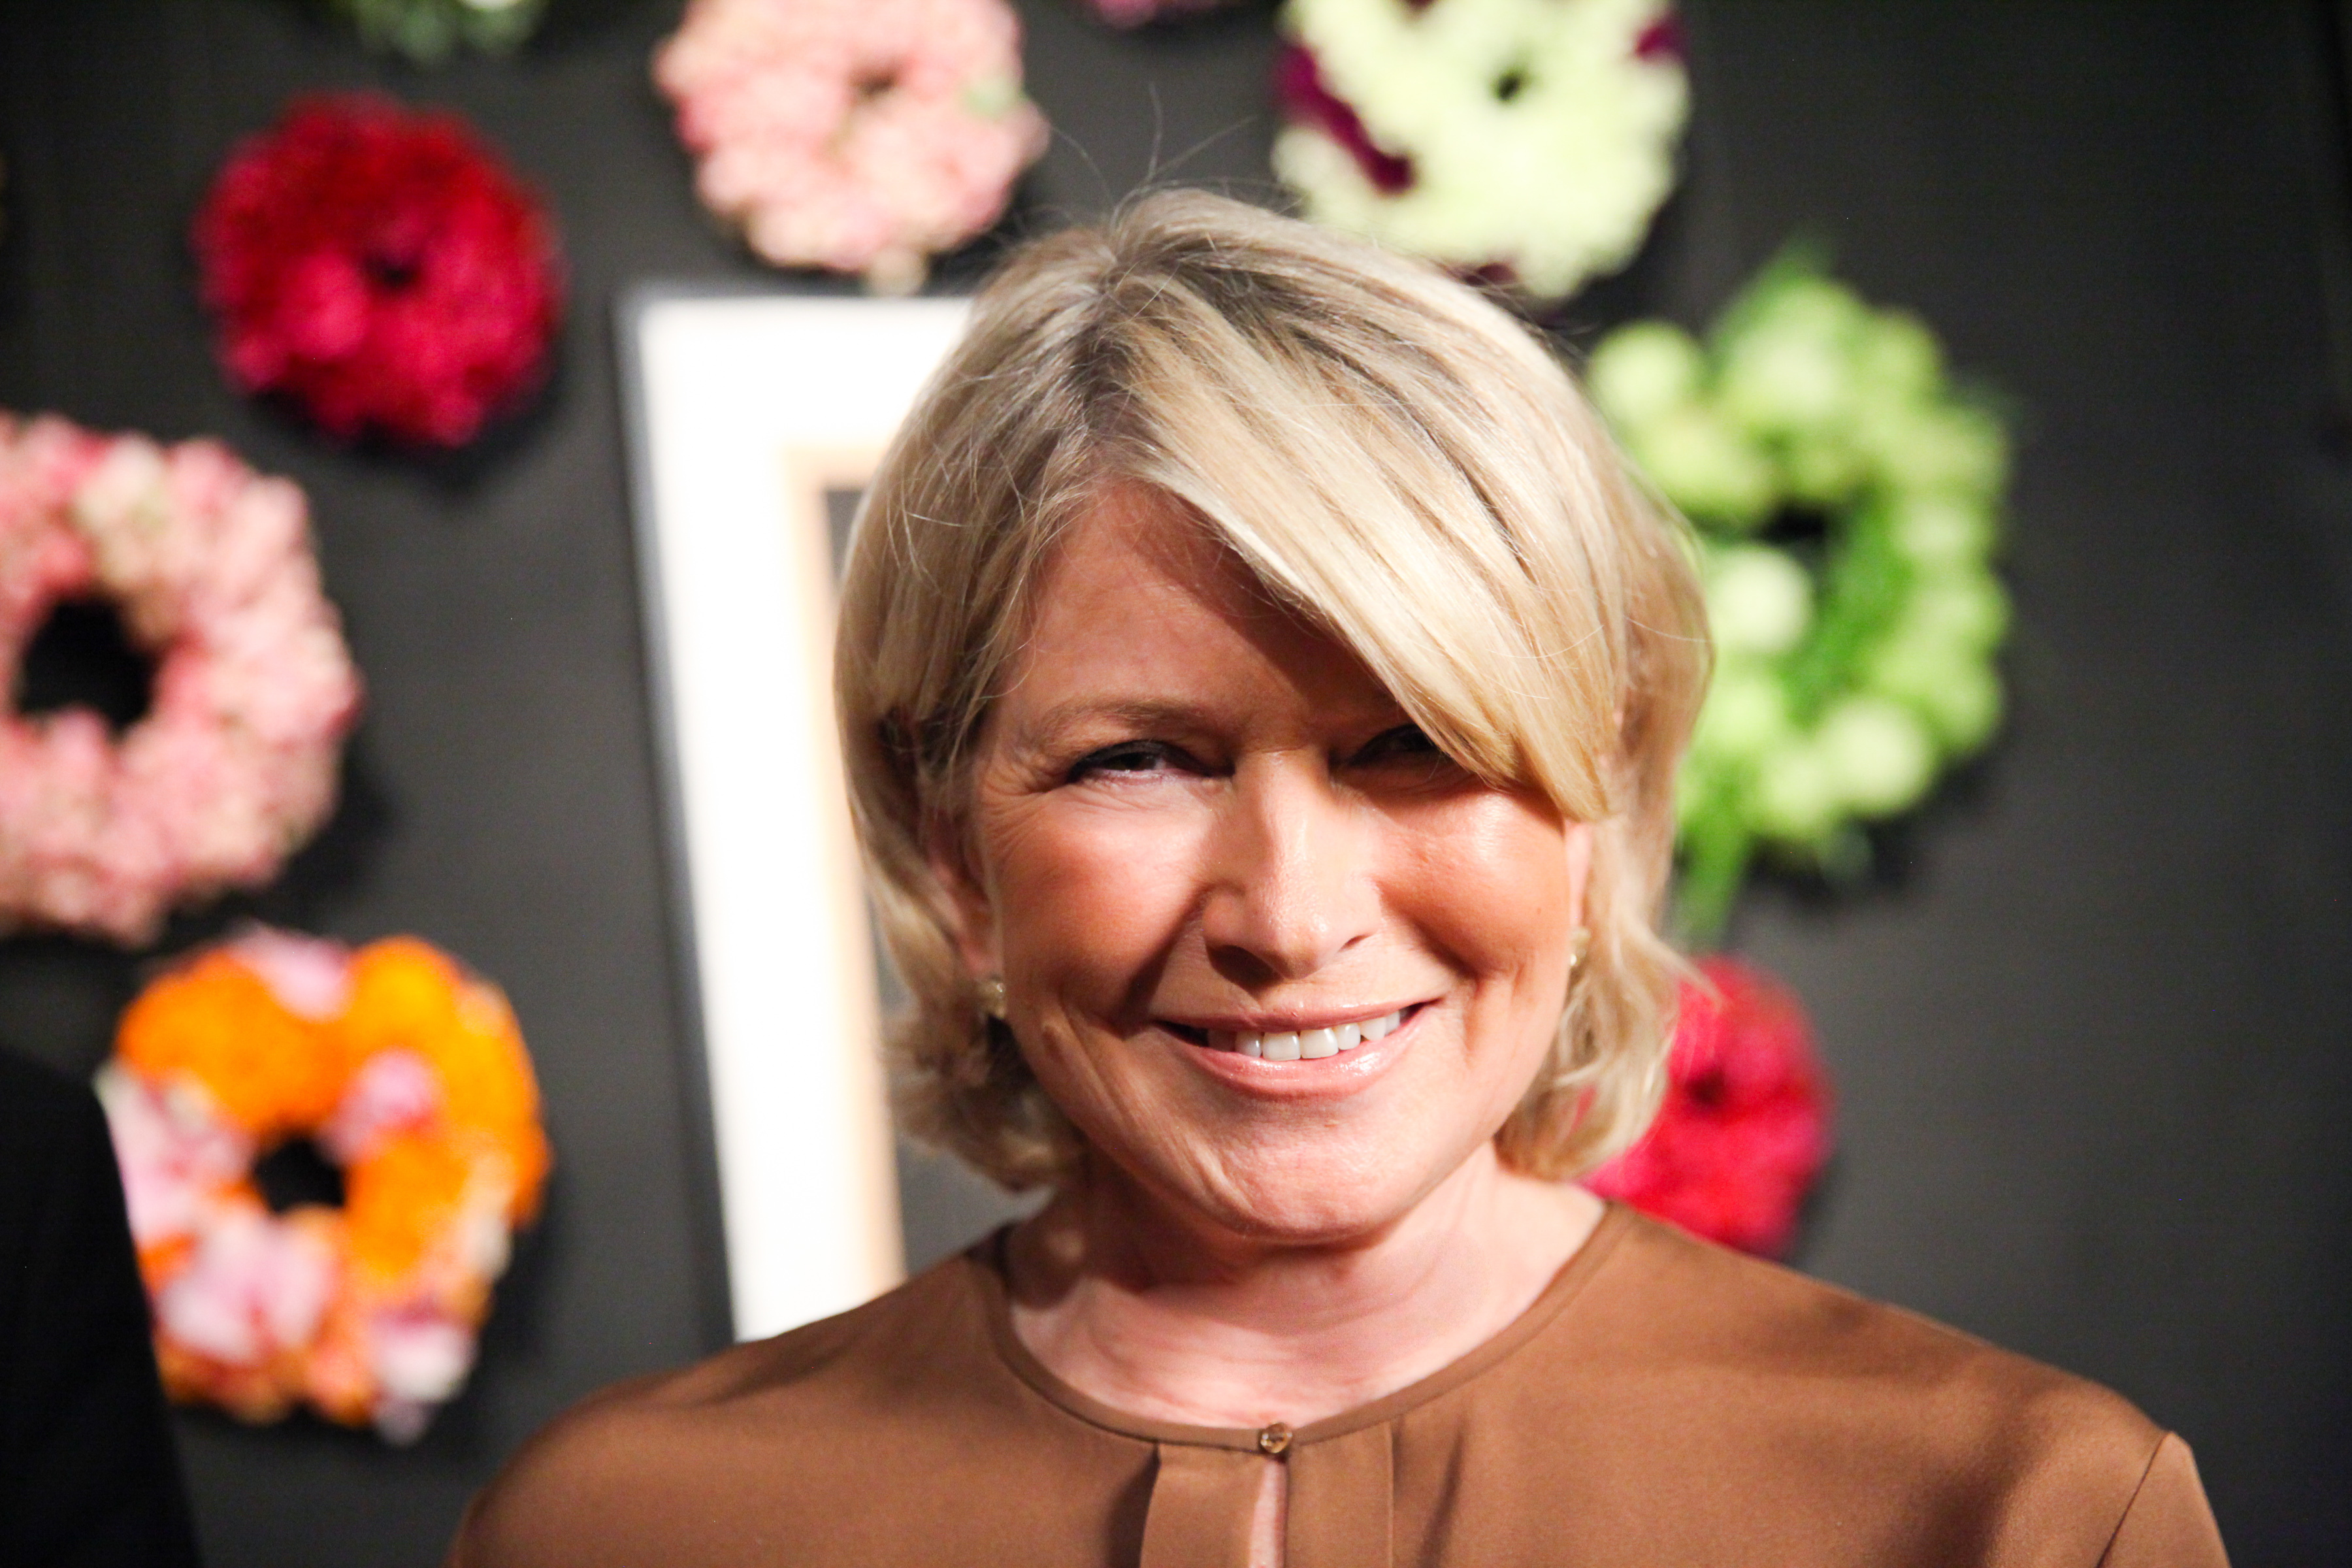 Martha Stewart Living Omnimedia Signs A Publishing Deal With Meredith Corpo...